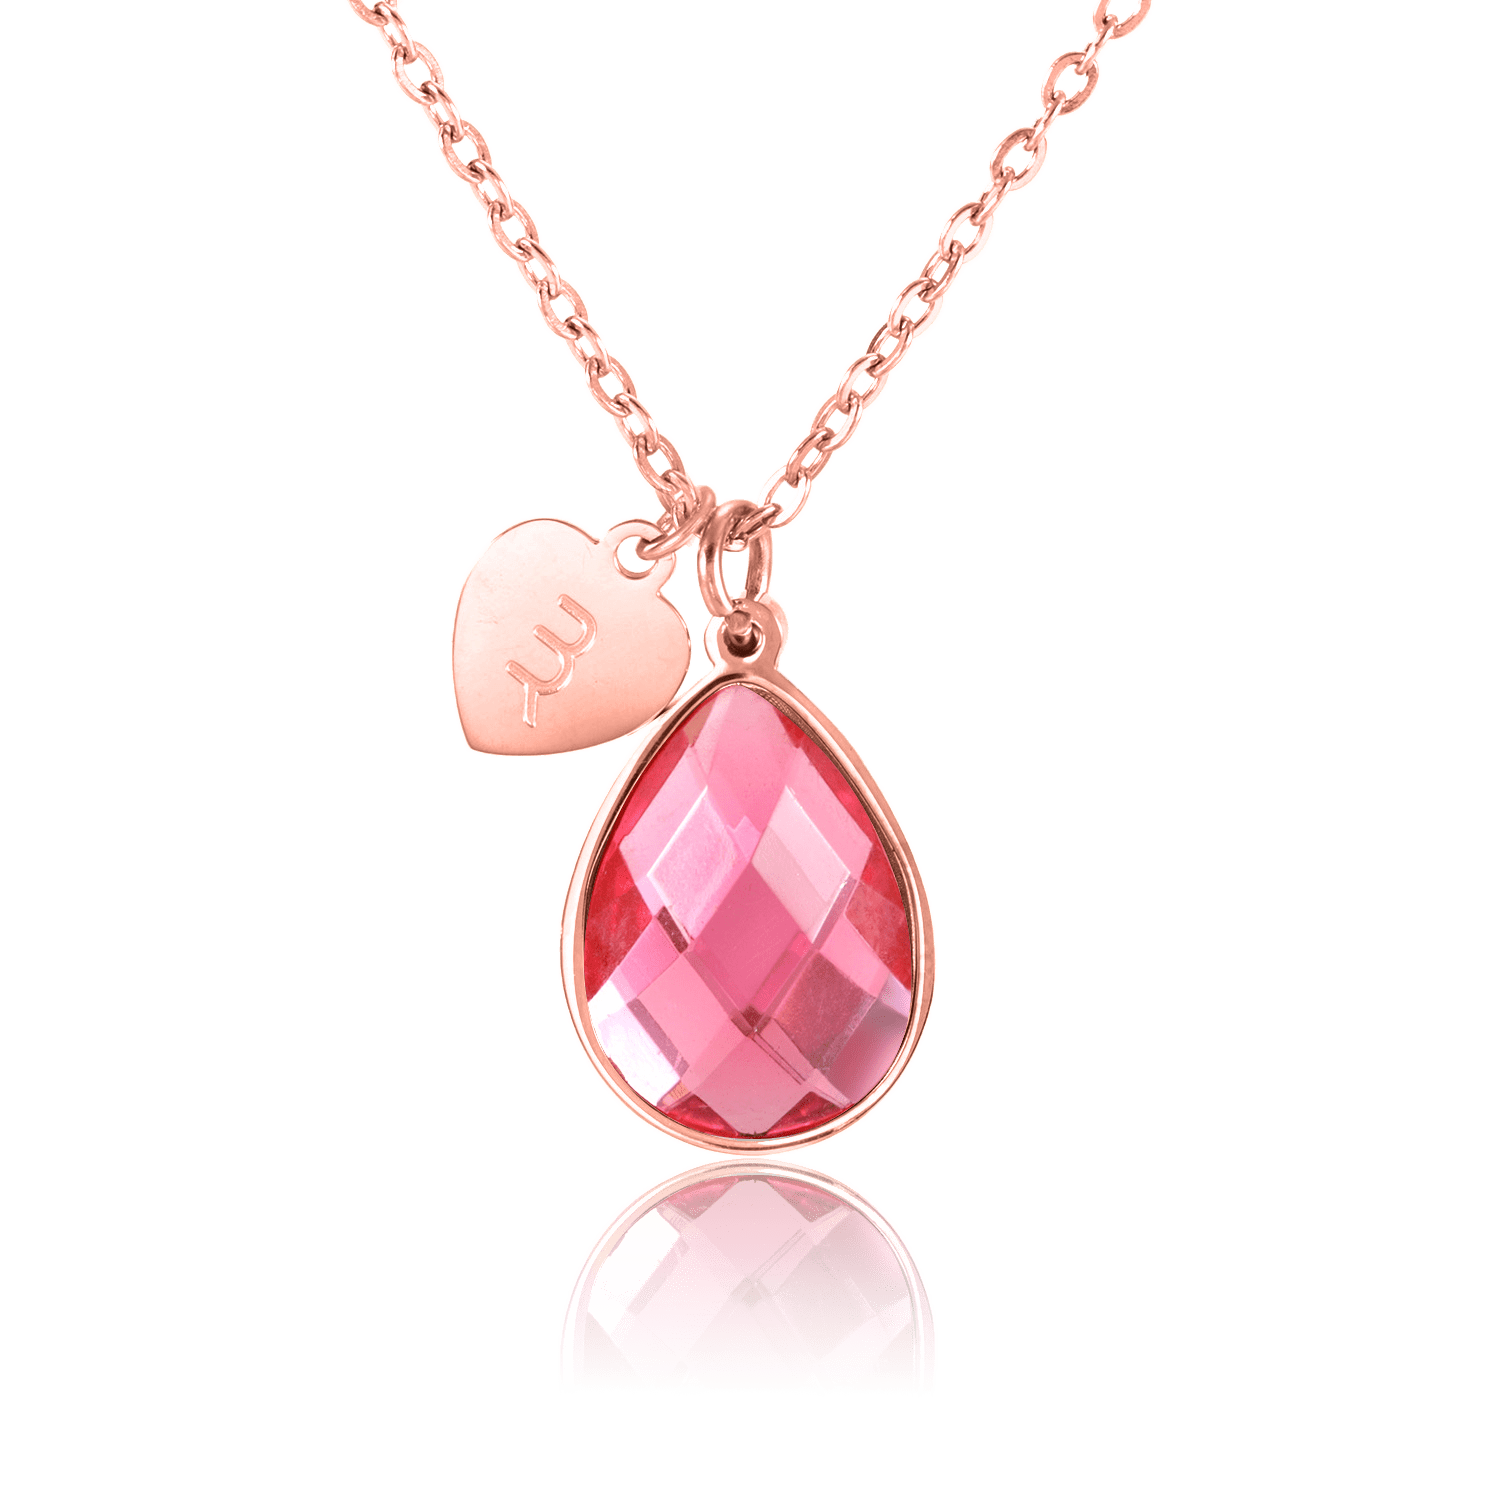 bianco rosso Necklaces Rose Gold October Birthstone - Pink Tourmaline cyprus greece jewelry gift free shipping europe worldwide